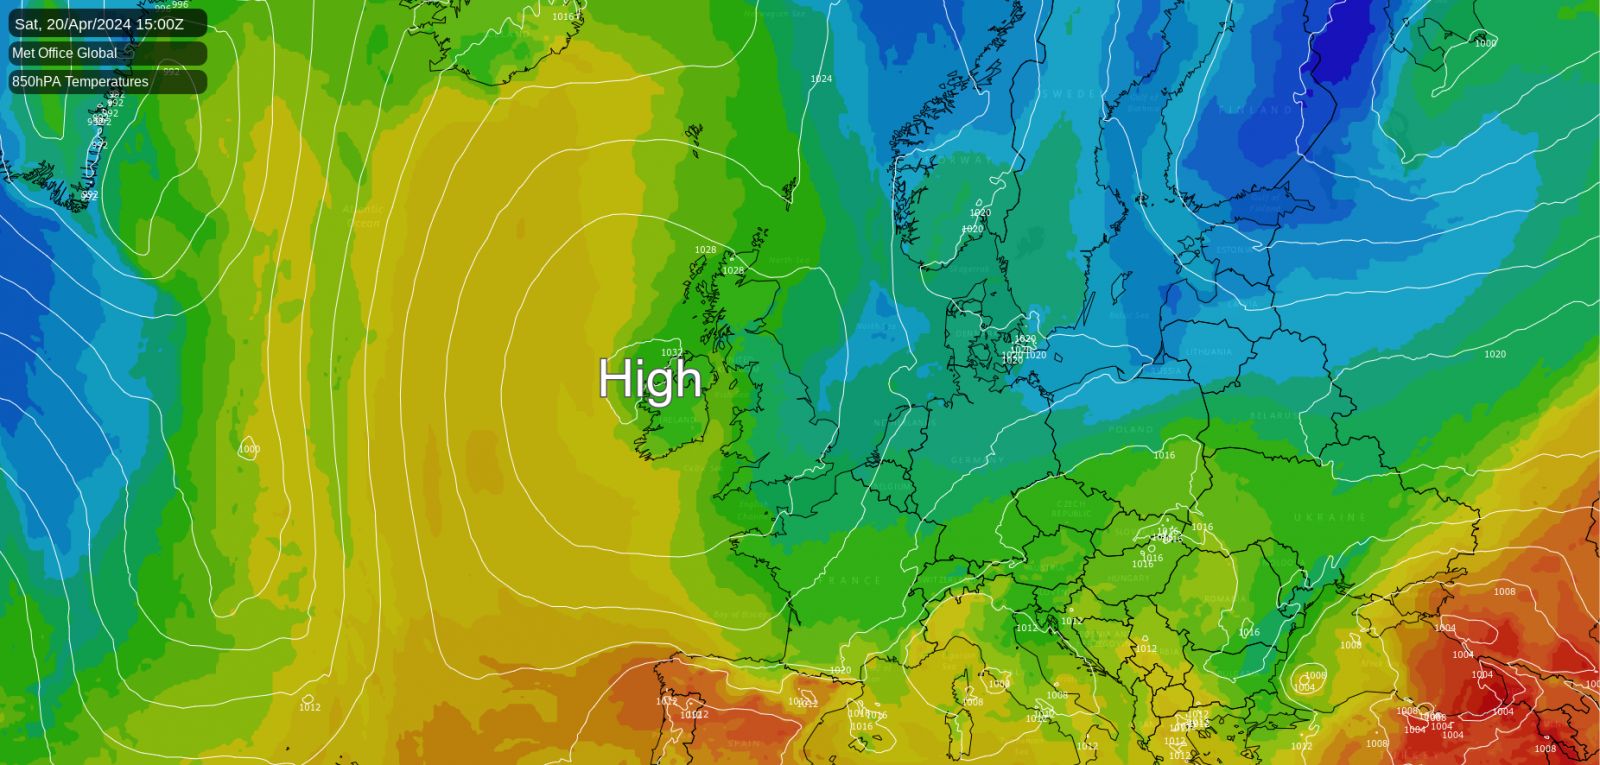 High pressure moving towards the UK at the weekend